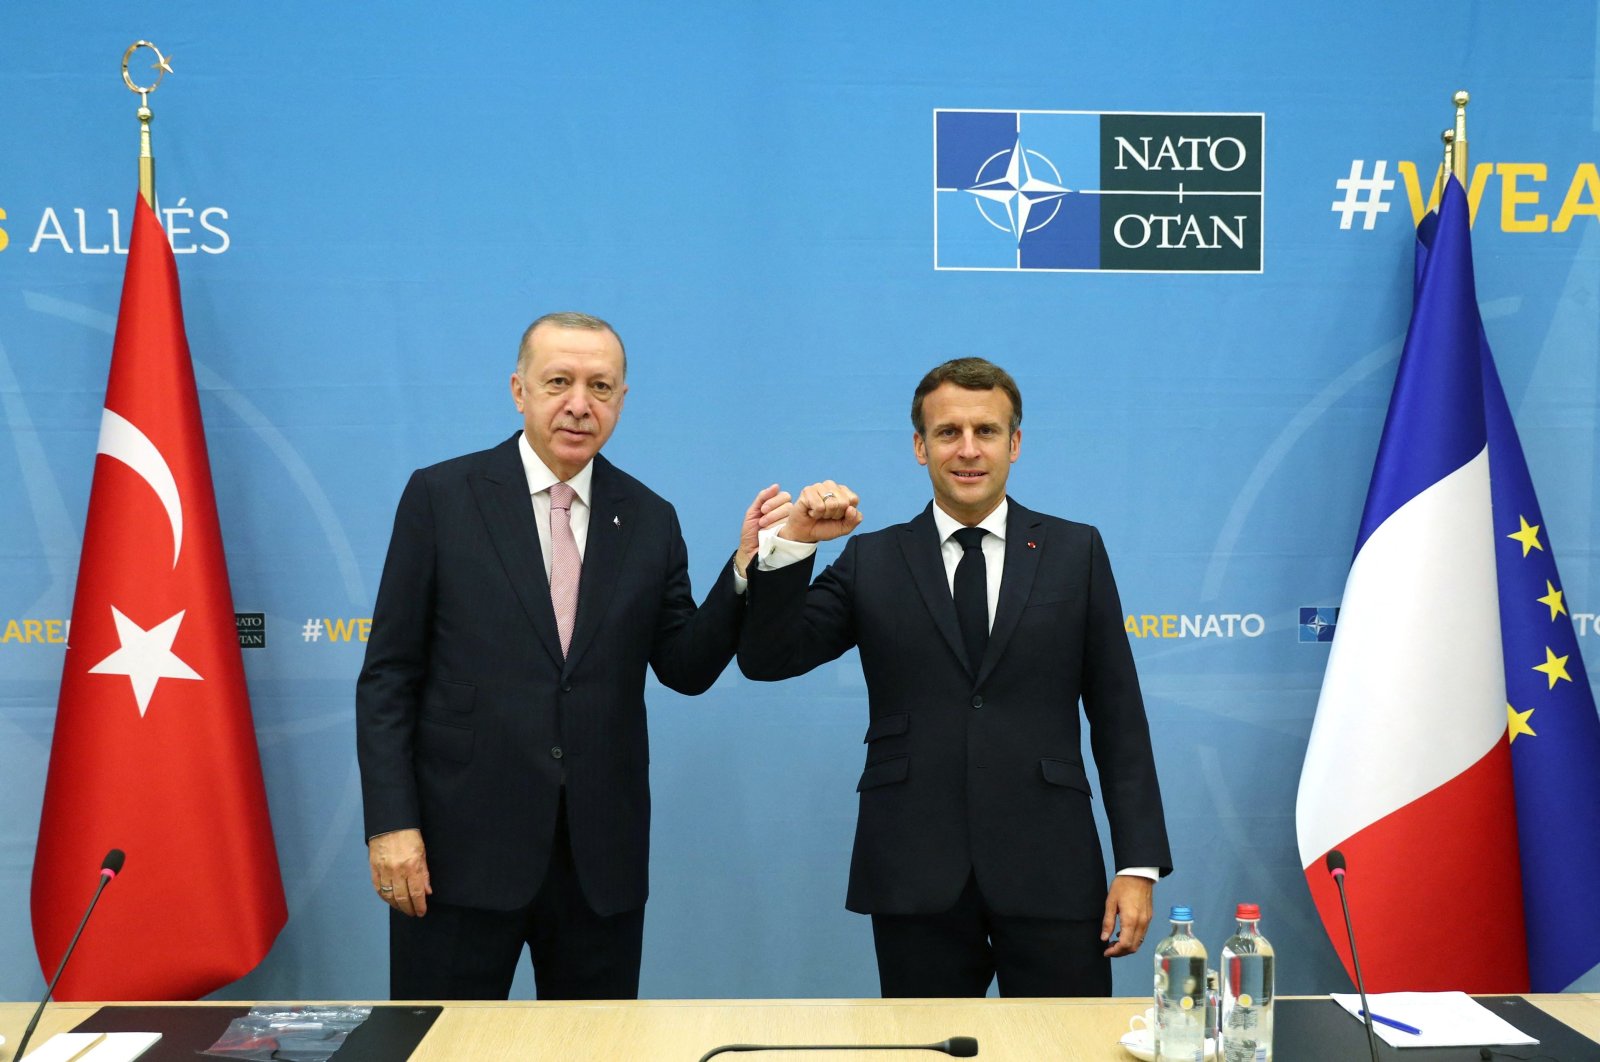 President Recep Tayyip Erdoğan (L) meets with his French counterpart Emmanuel Macron (R) during a bilateral meeting on the sidelines of the NATO summit in Brussels, Belgium, June 14, 2021. (AFP Photo)